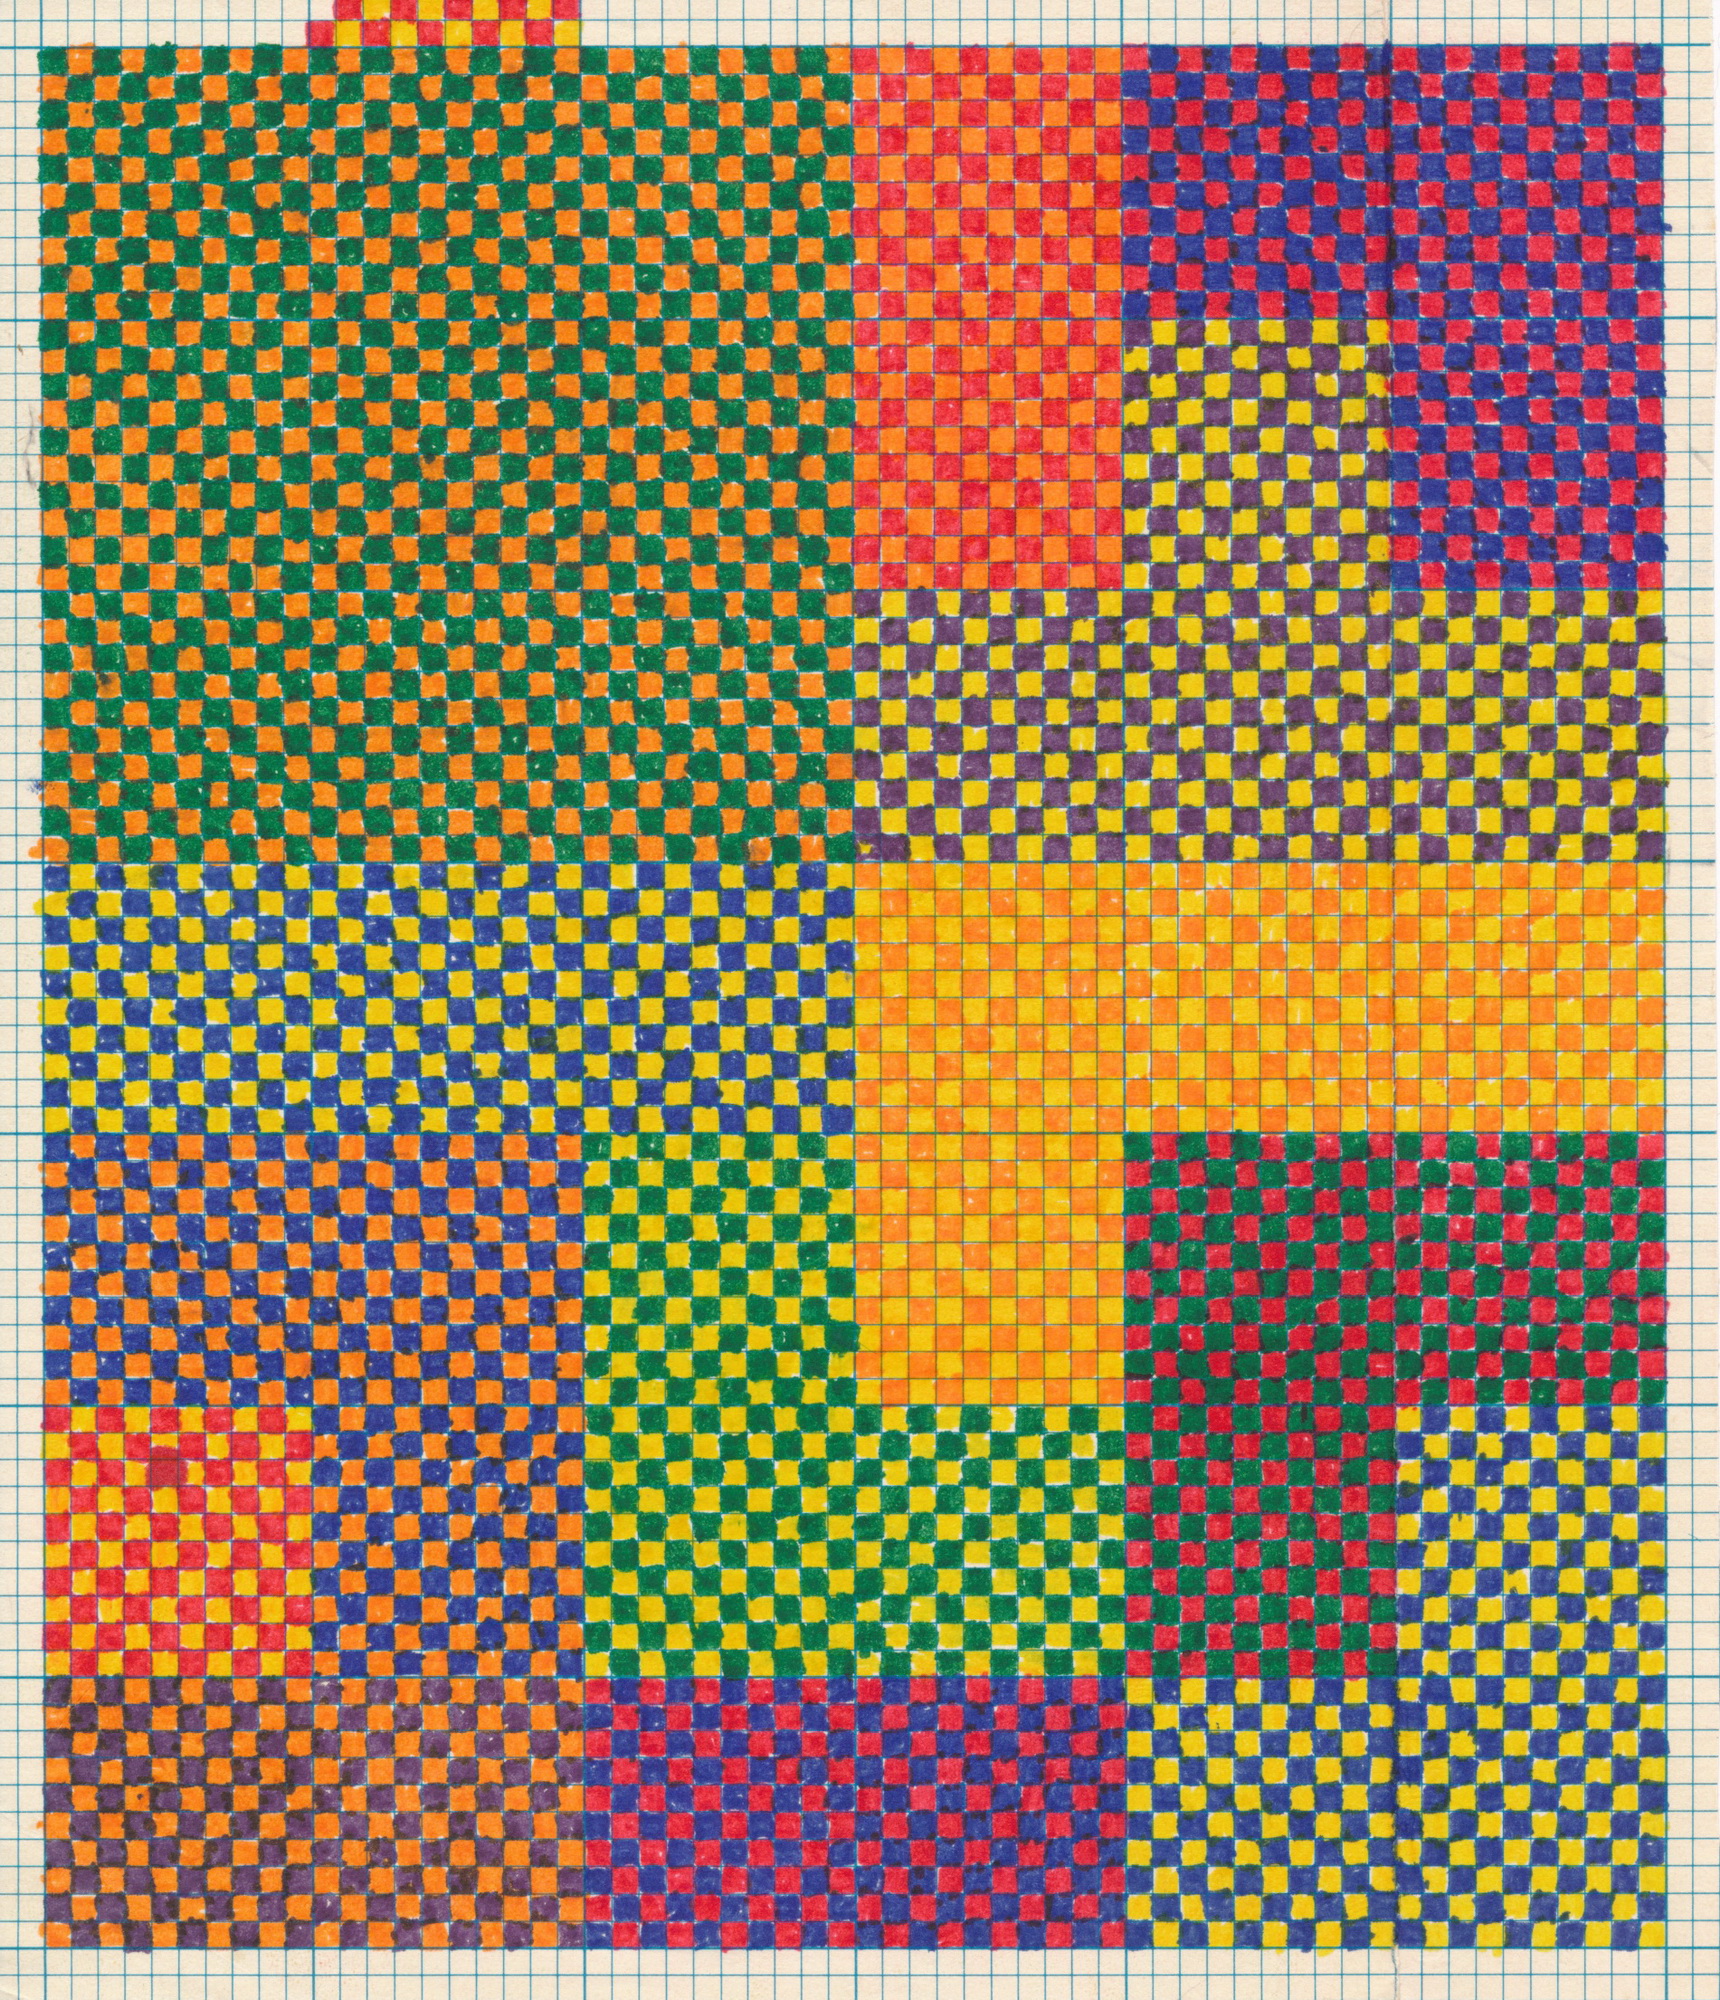 Colored Squares<br> Colored Pens - 1969